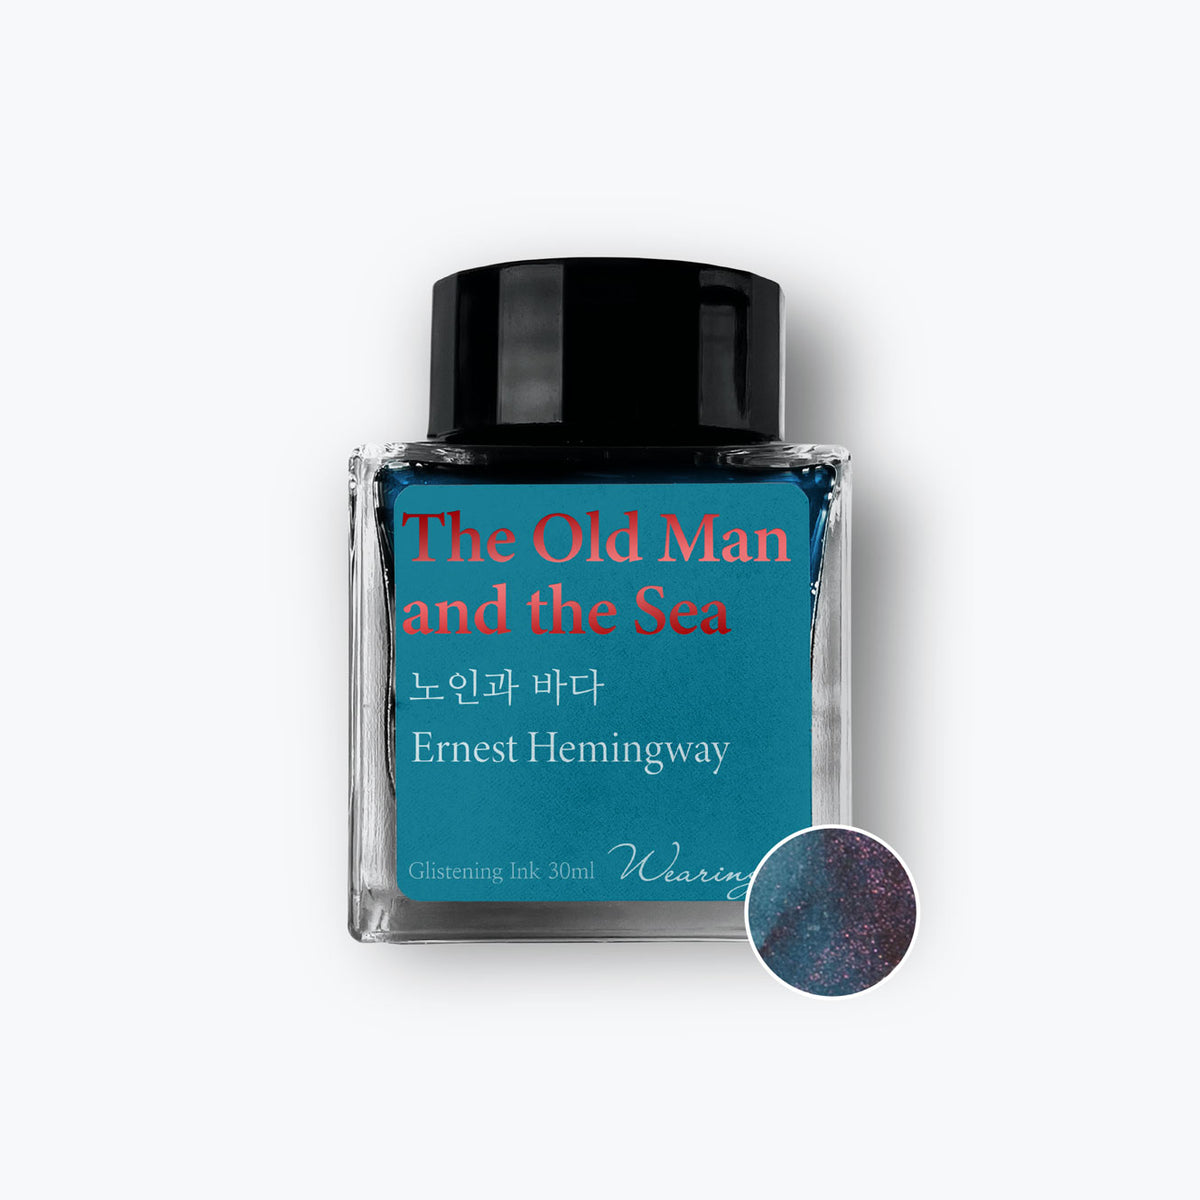 Wearingeul - Fountain Pen Ink - The Old Man and the Sea (Shimmer)